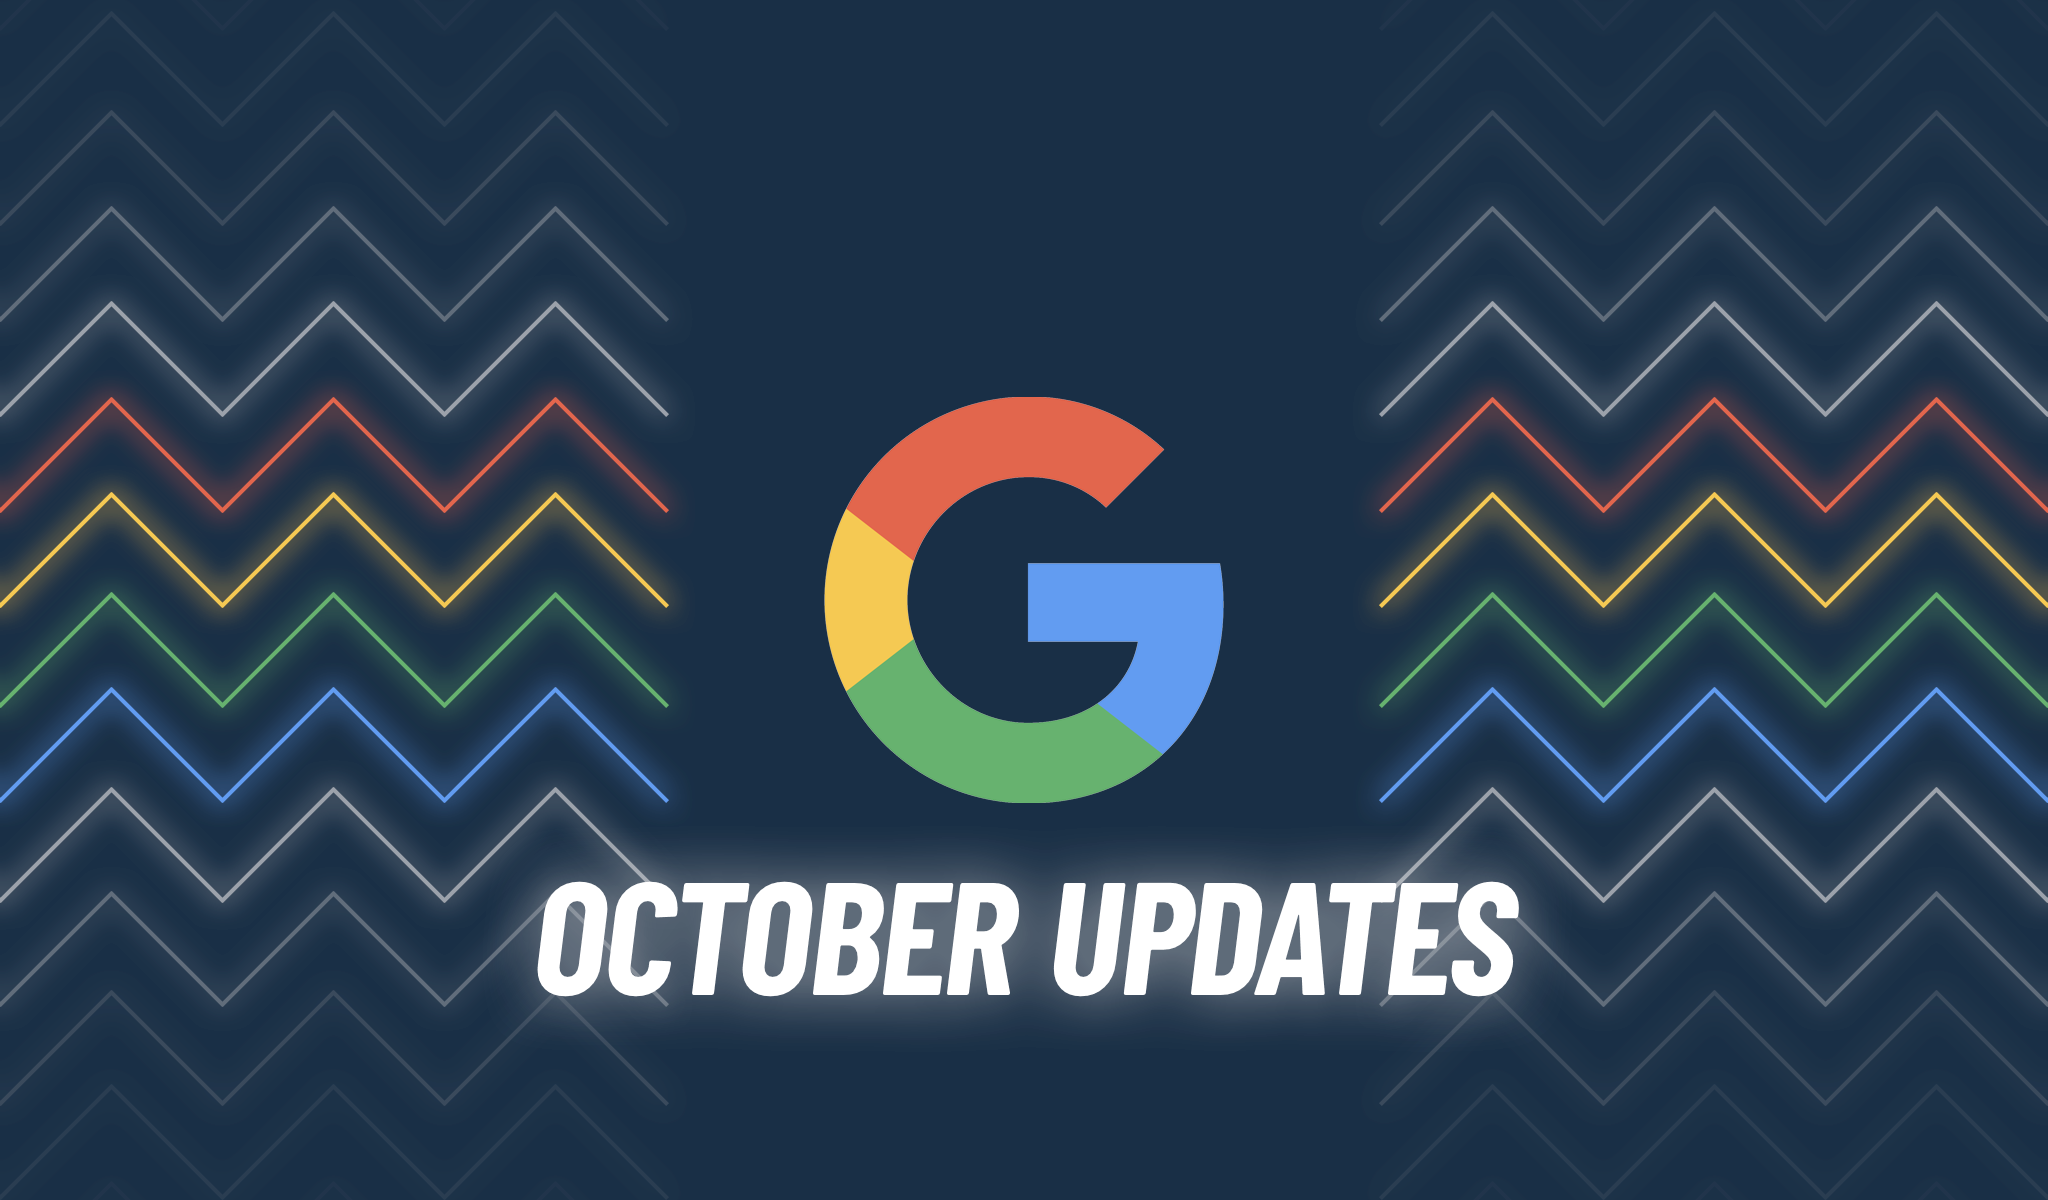 Roundup of Google updates from October 2021